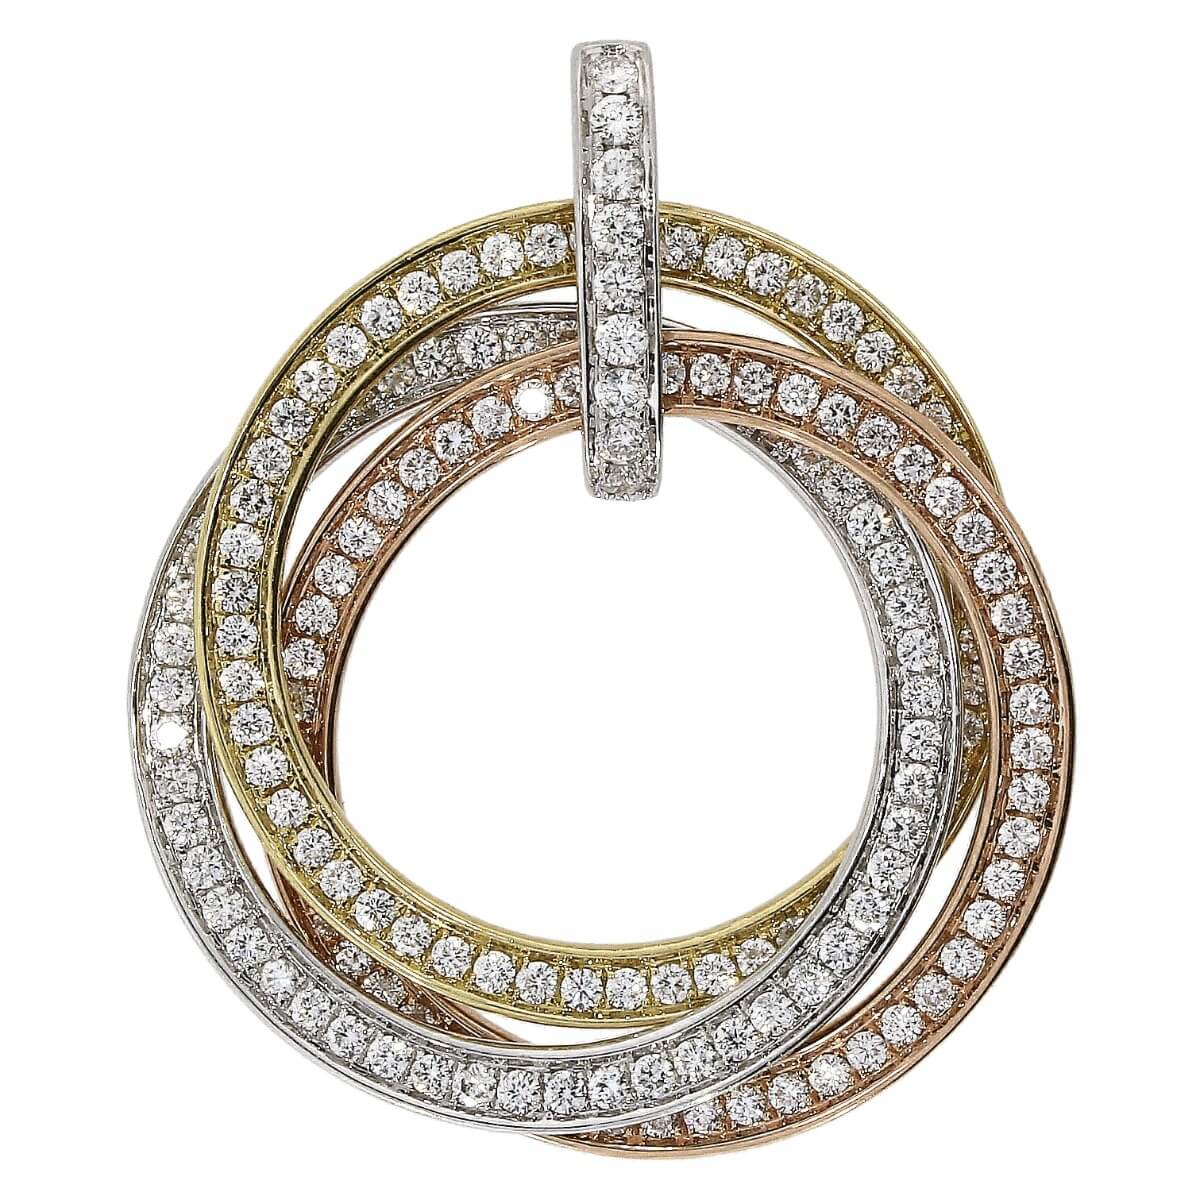 18ct yellow rose and white gold multi circular diamond pendant on trace chain c670